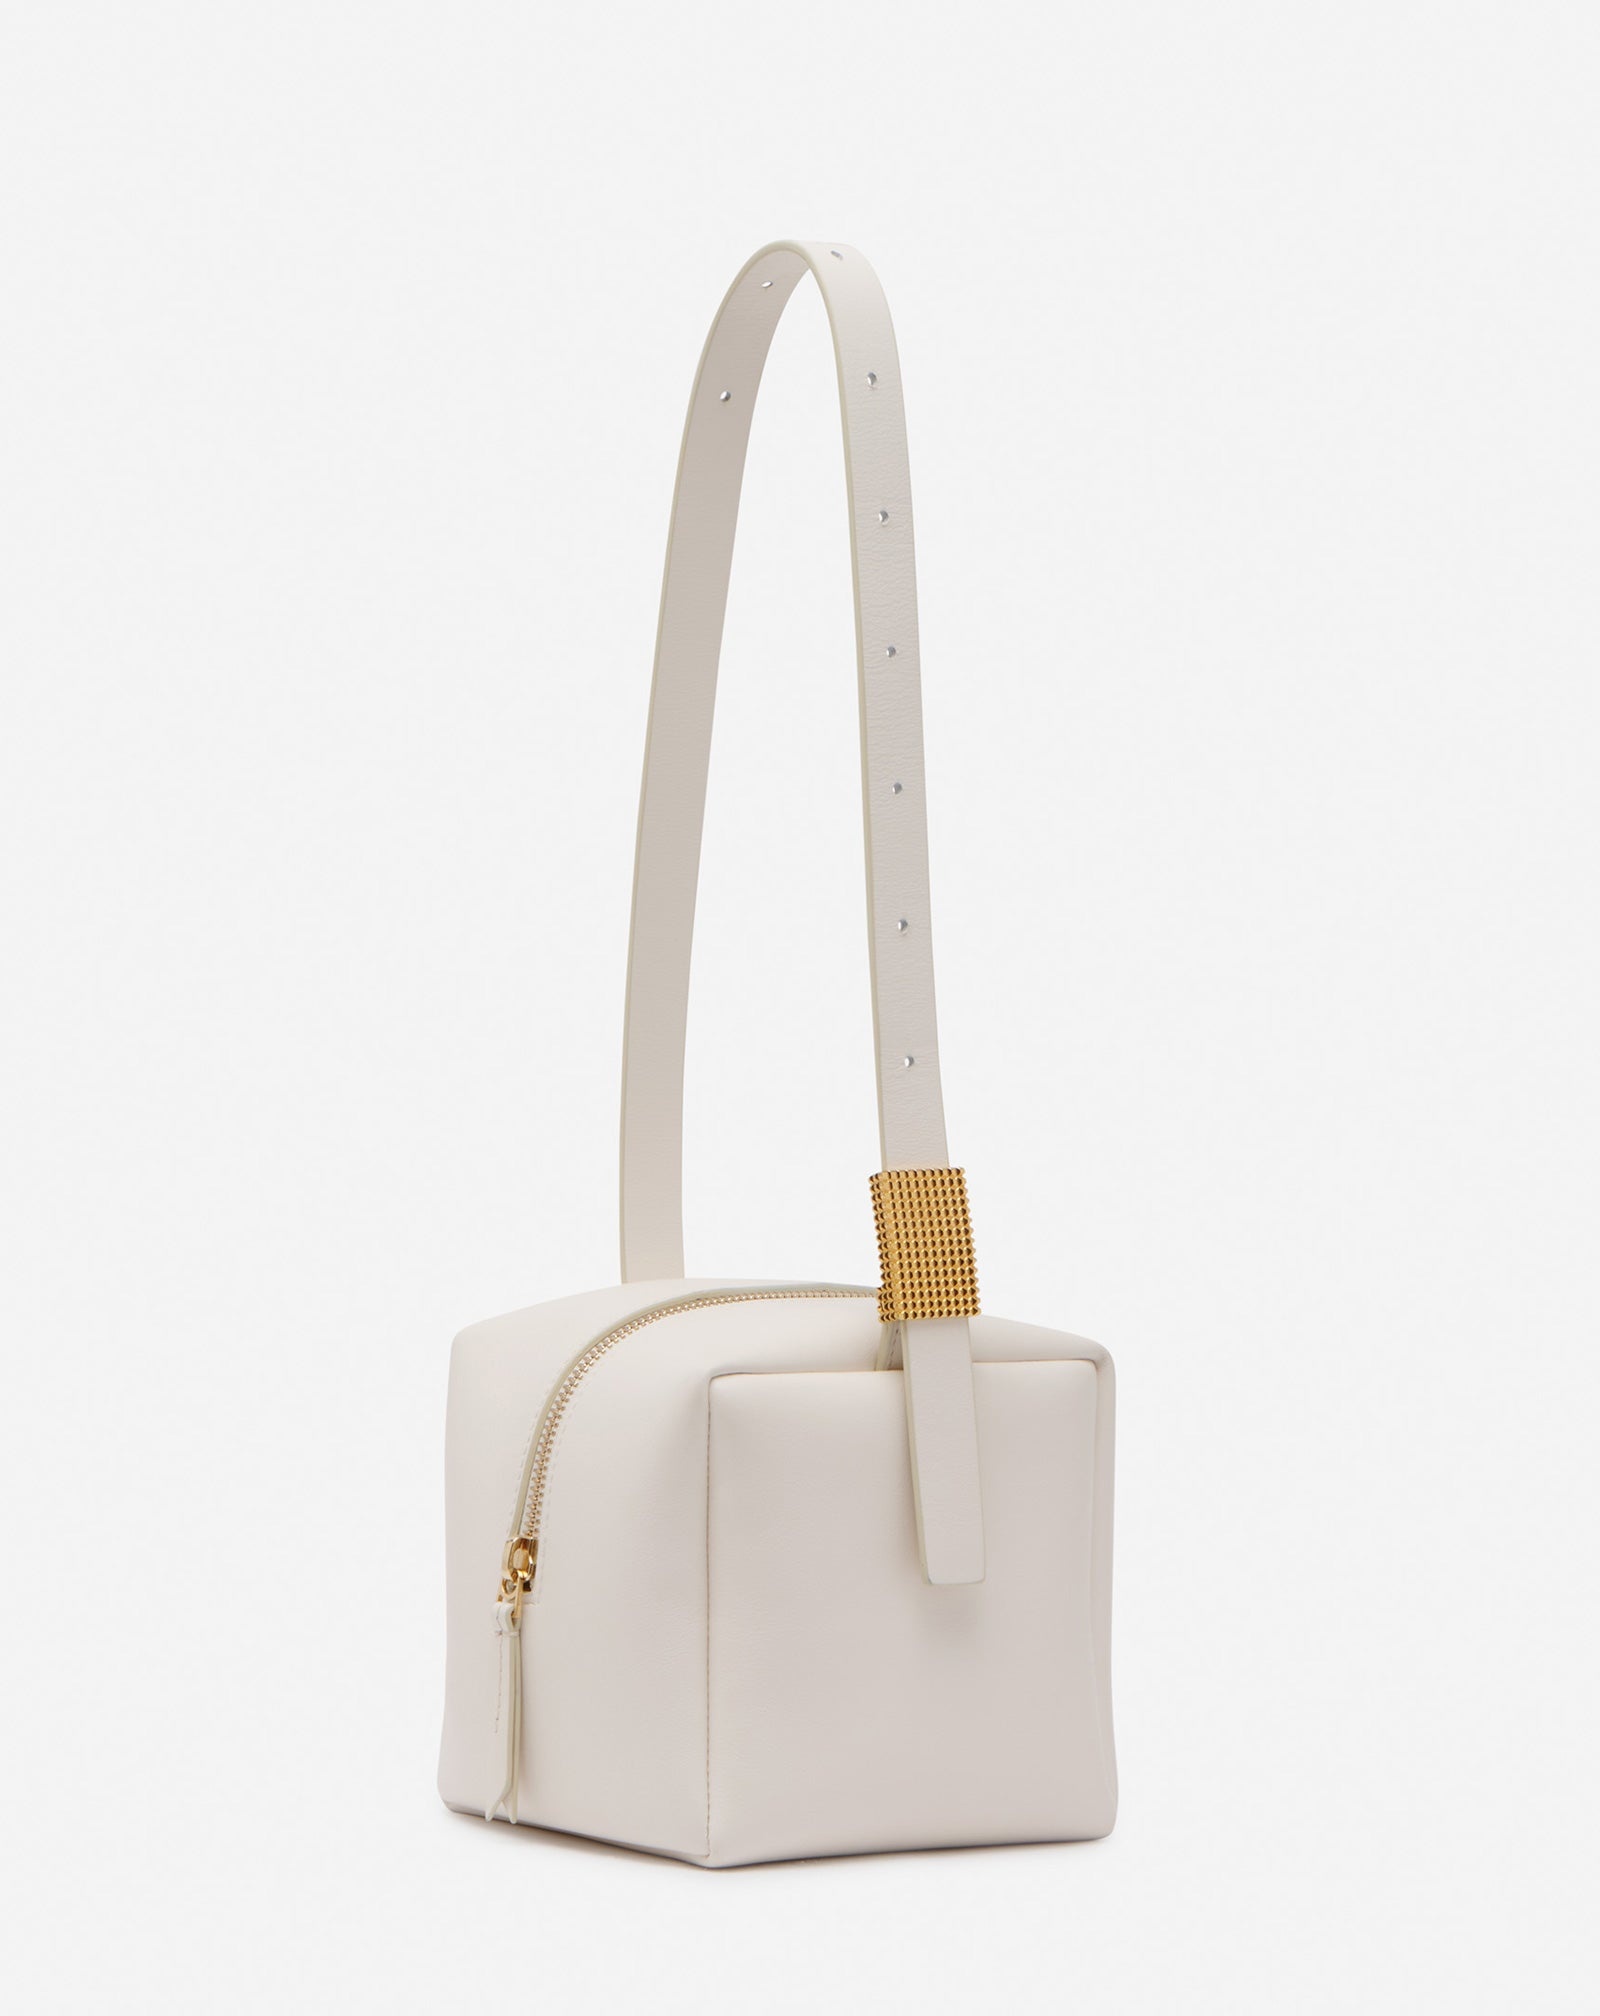 TEMPO BY LANVIN LEATHER BAG - 3